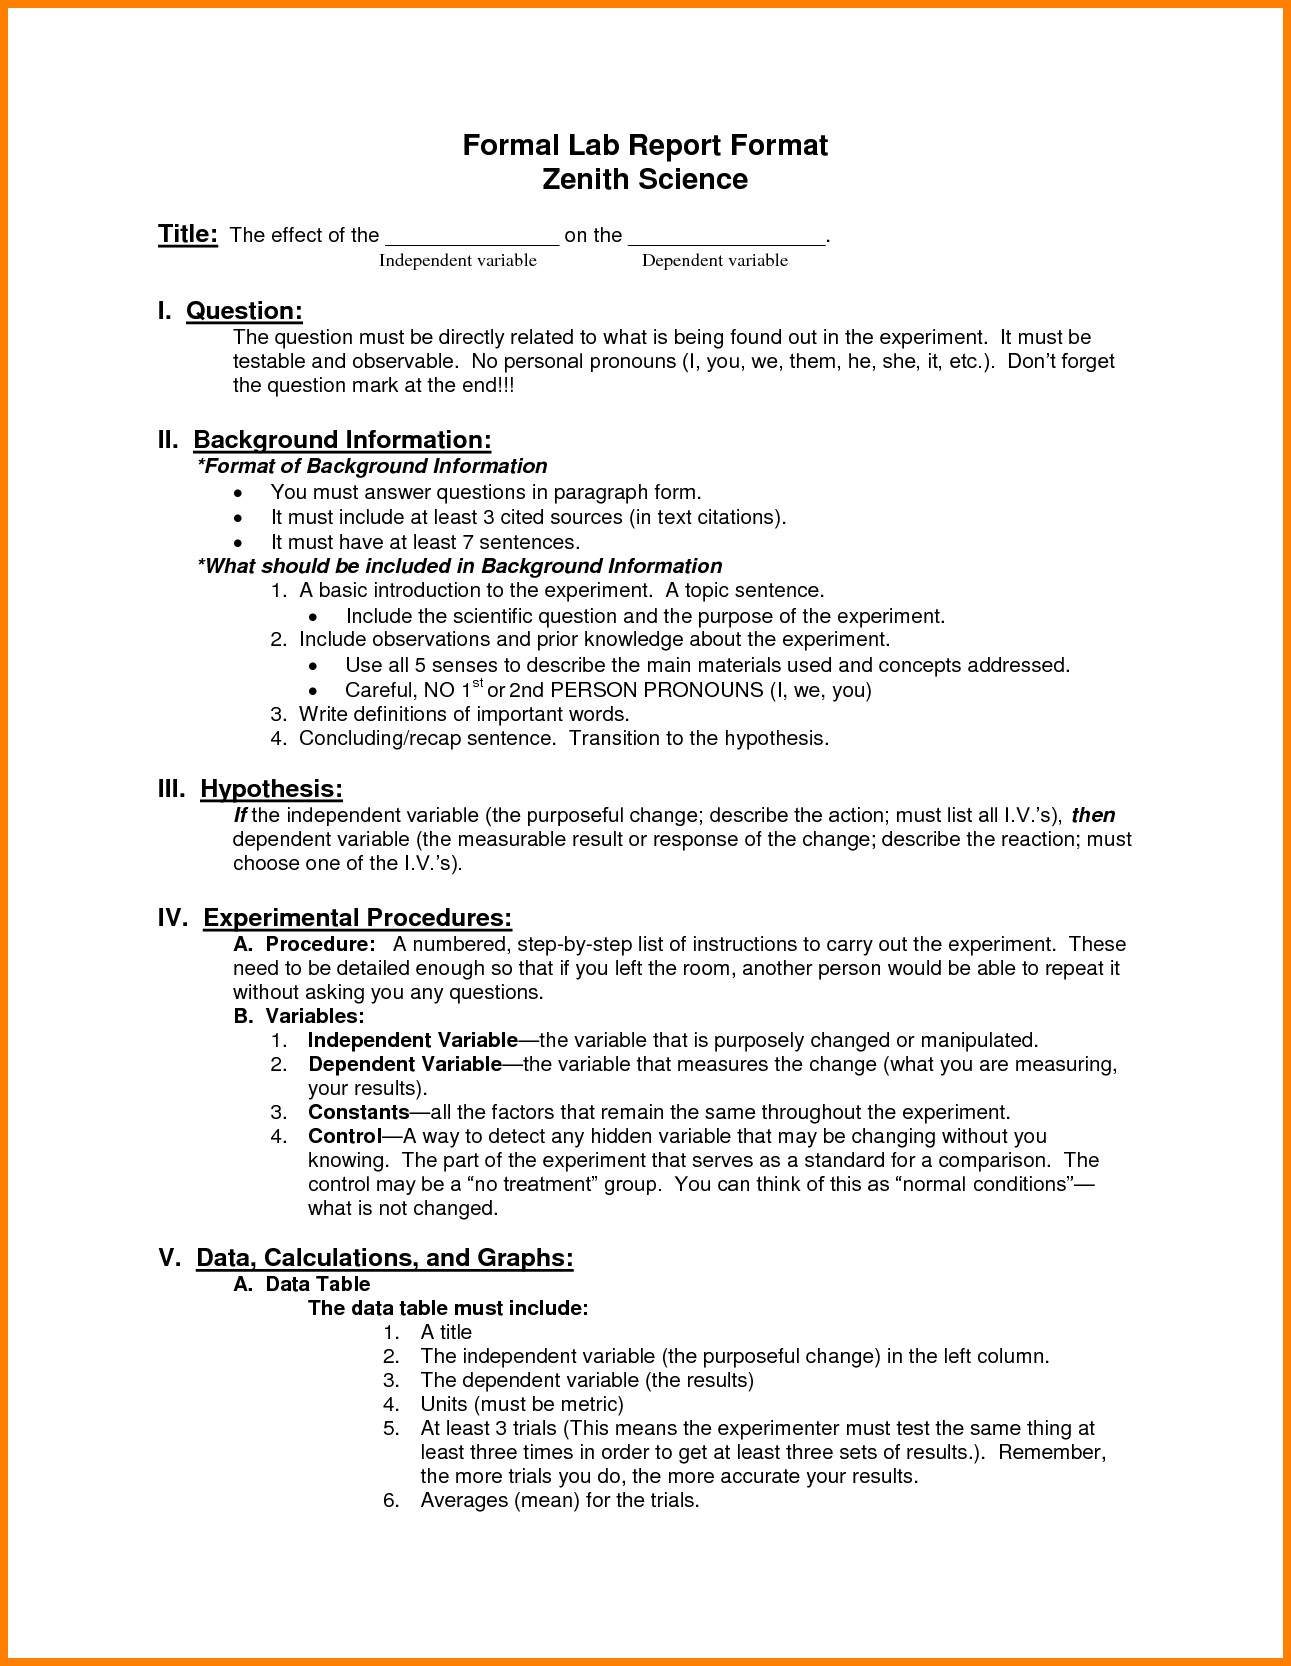 Formal Lab Report Template Lab Report format